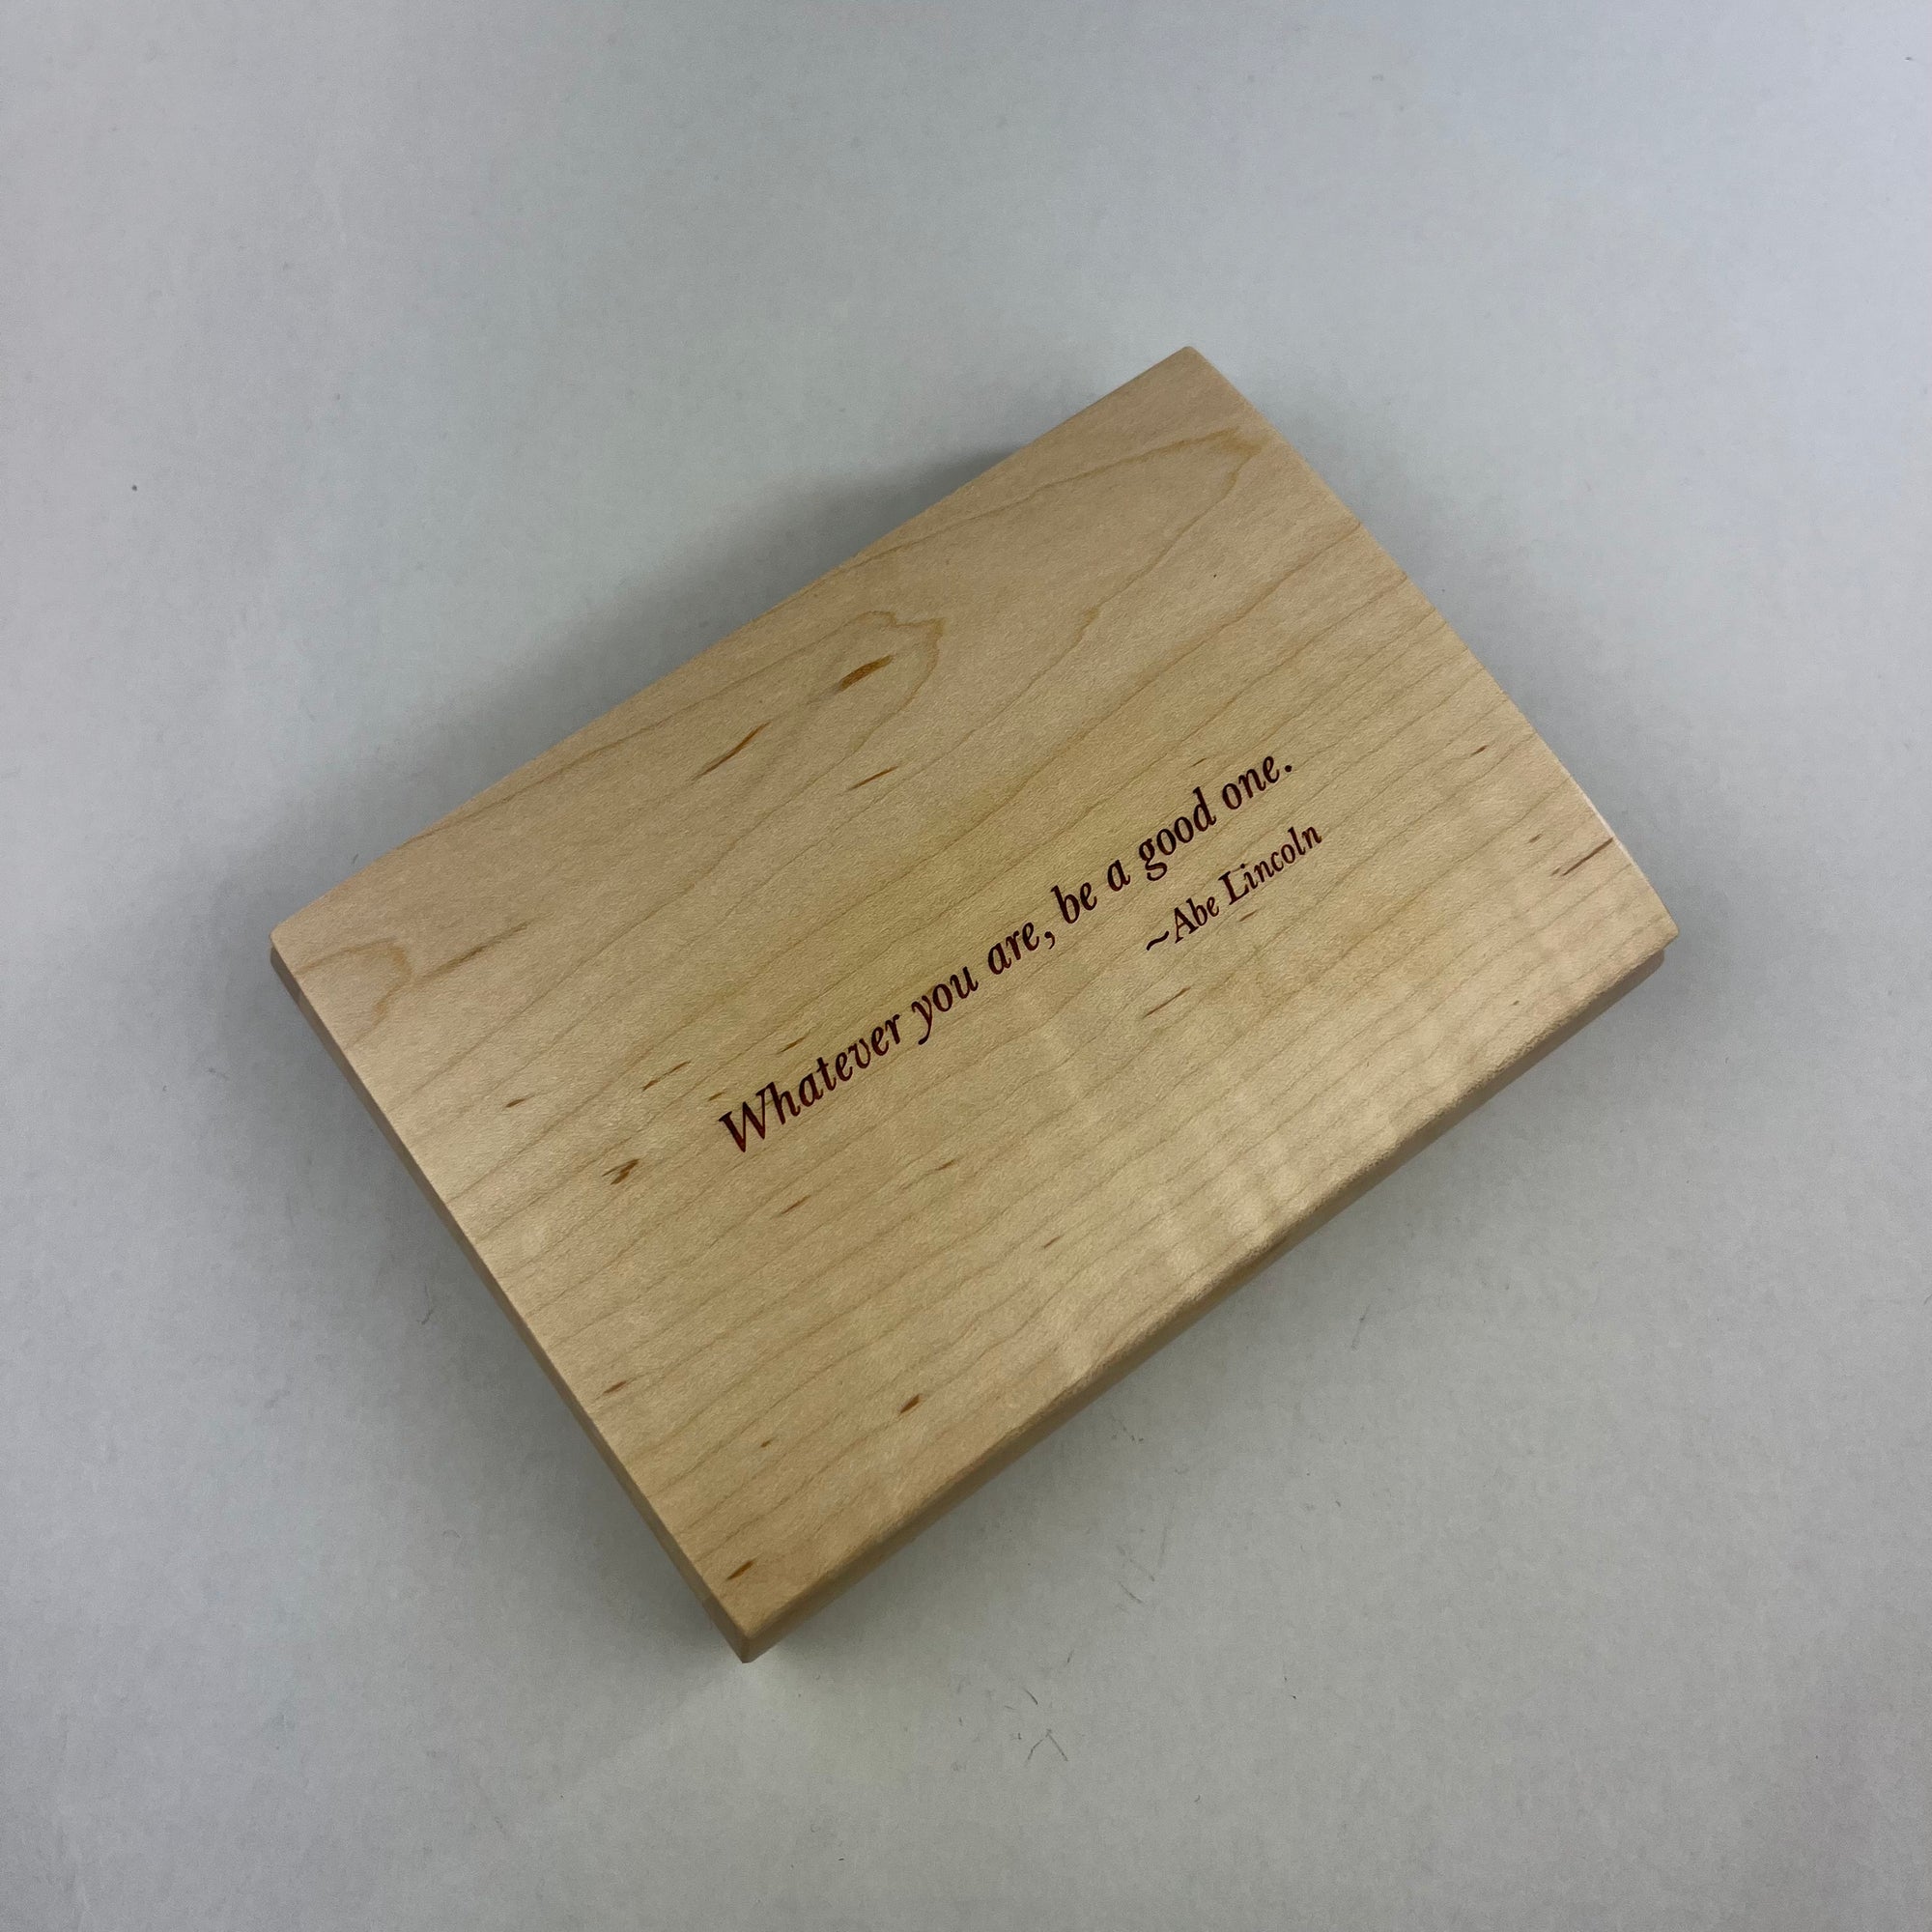 Tranquility Box - Whatever You Are, Be A Good One - Heart of the Home PA